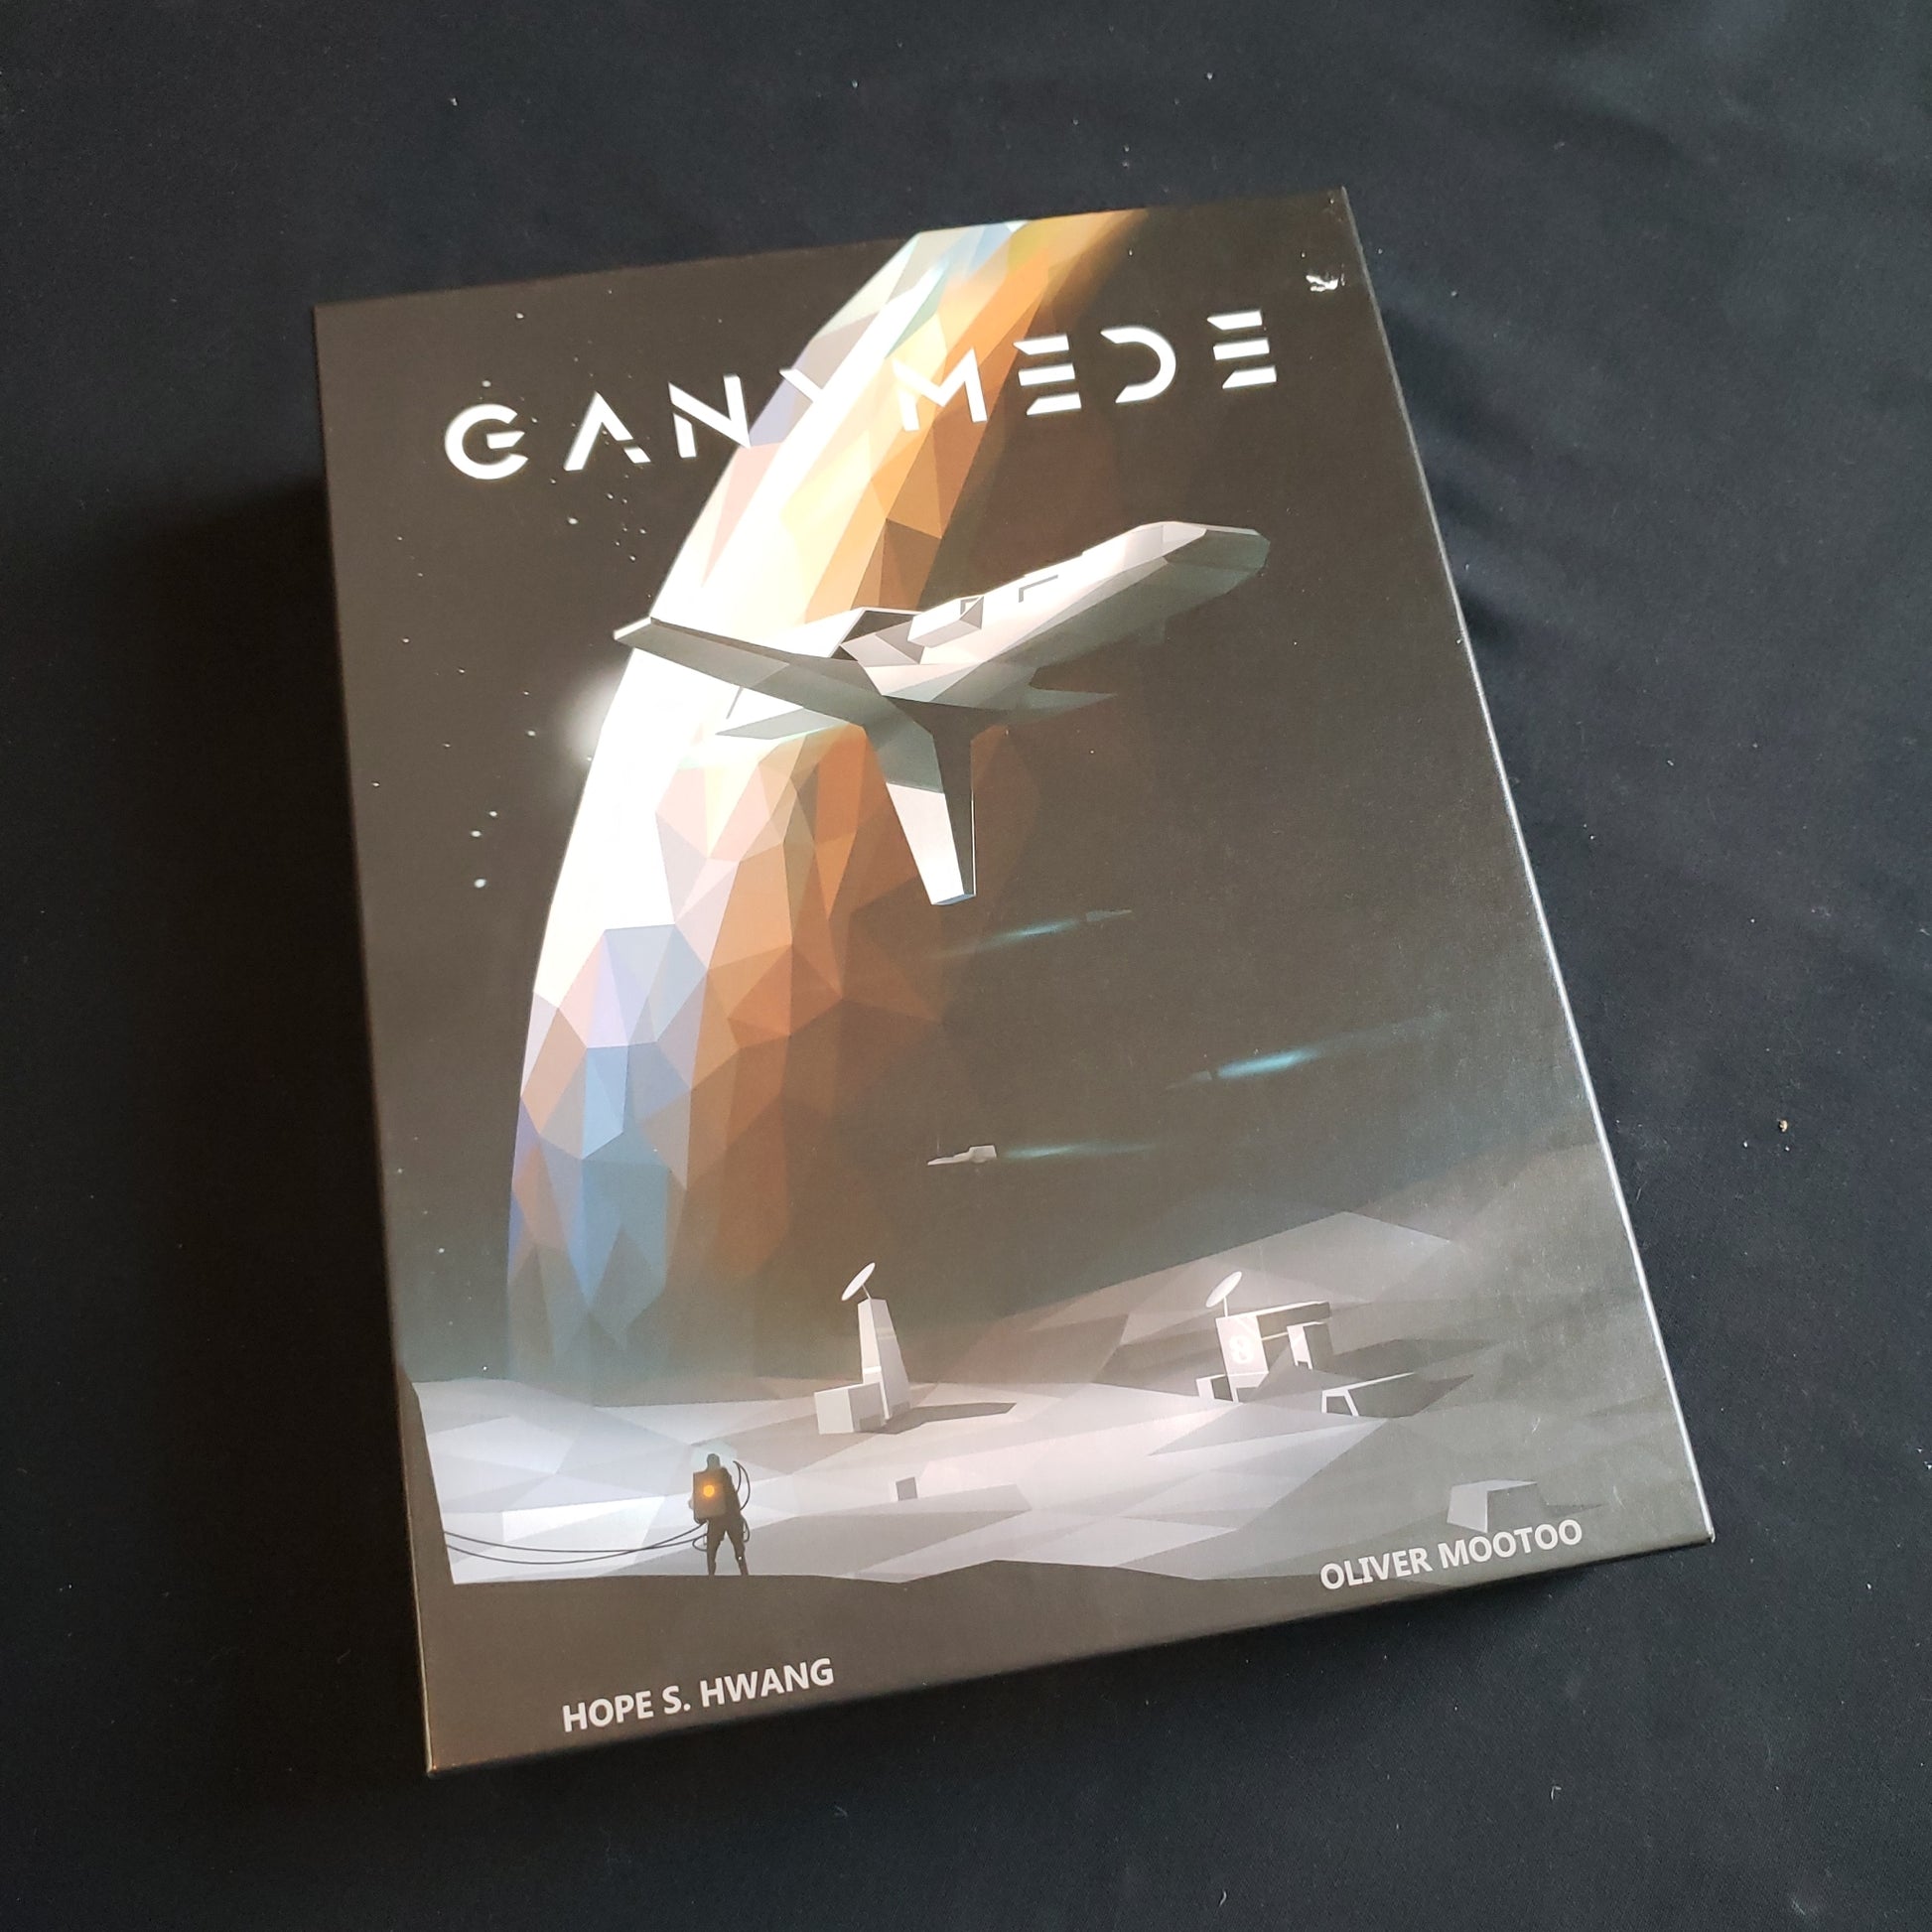 Image shows the front cover of the box of the Ganymede board game